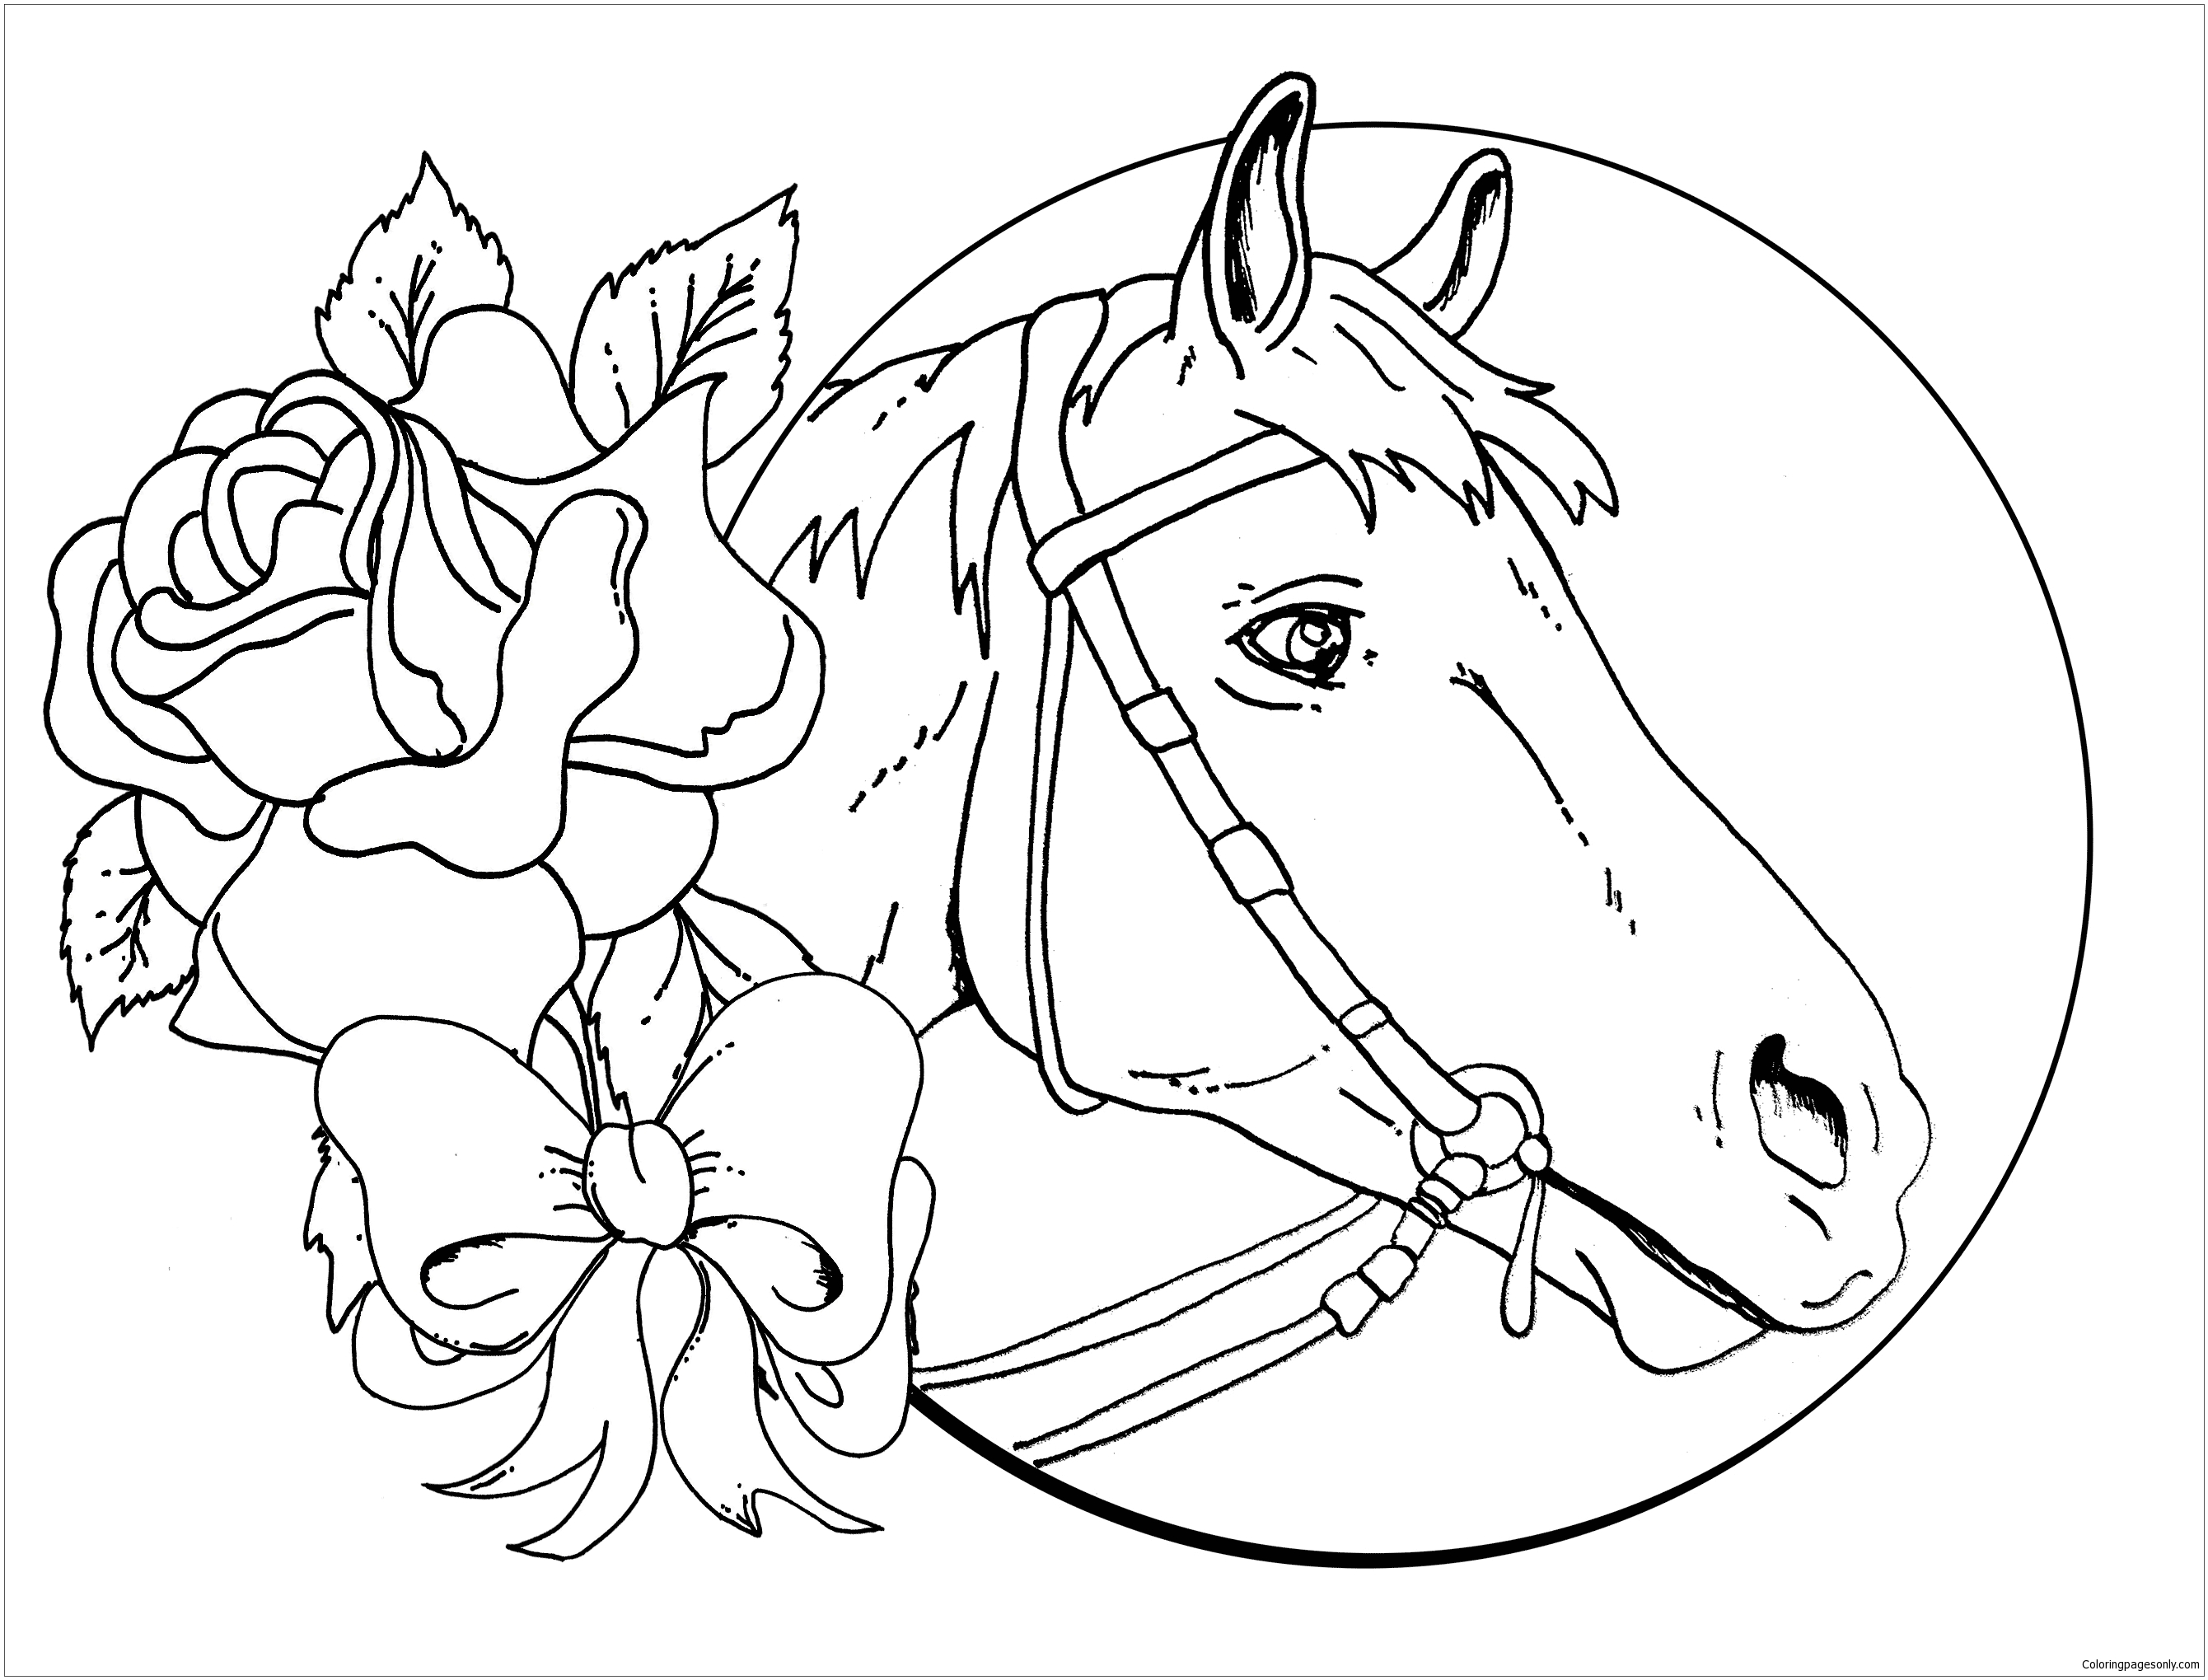 Coloring Pages For Girls Indian And Horse - Coloring Pages